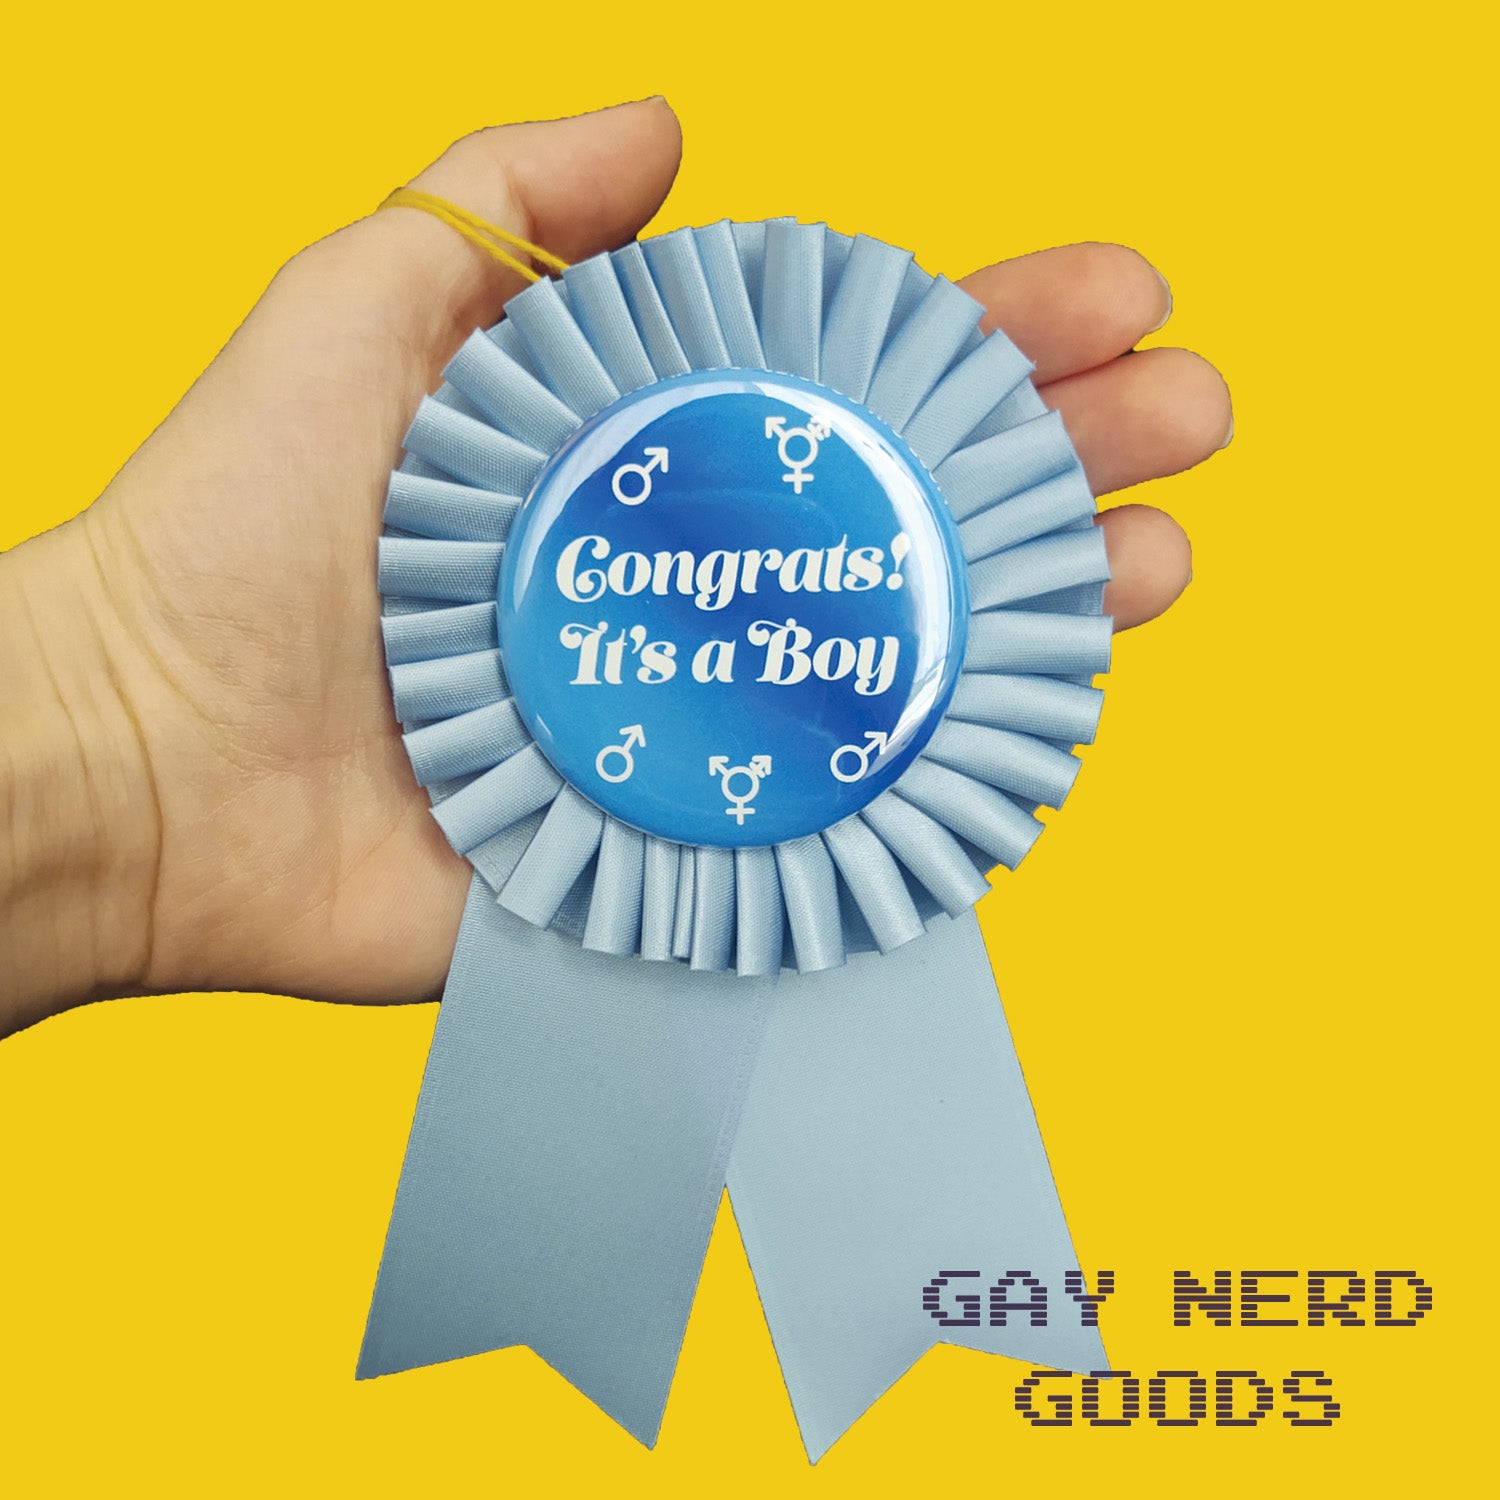 hand holding the blue "congrats! it's a boy" award ribbon rosette on a yellow background